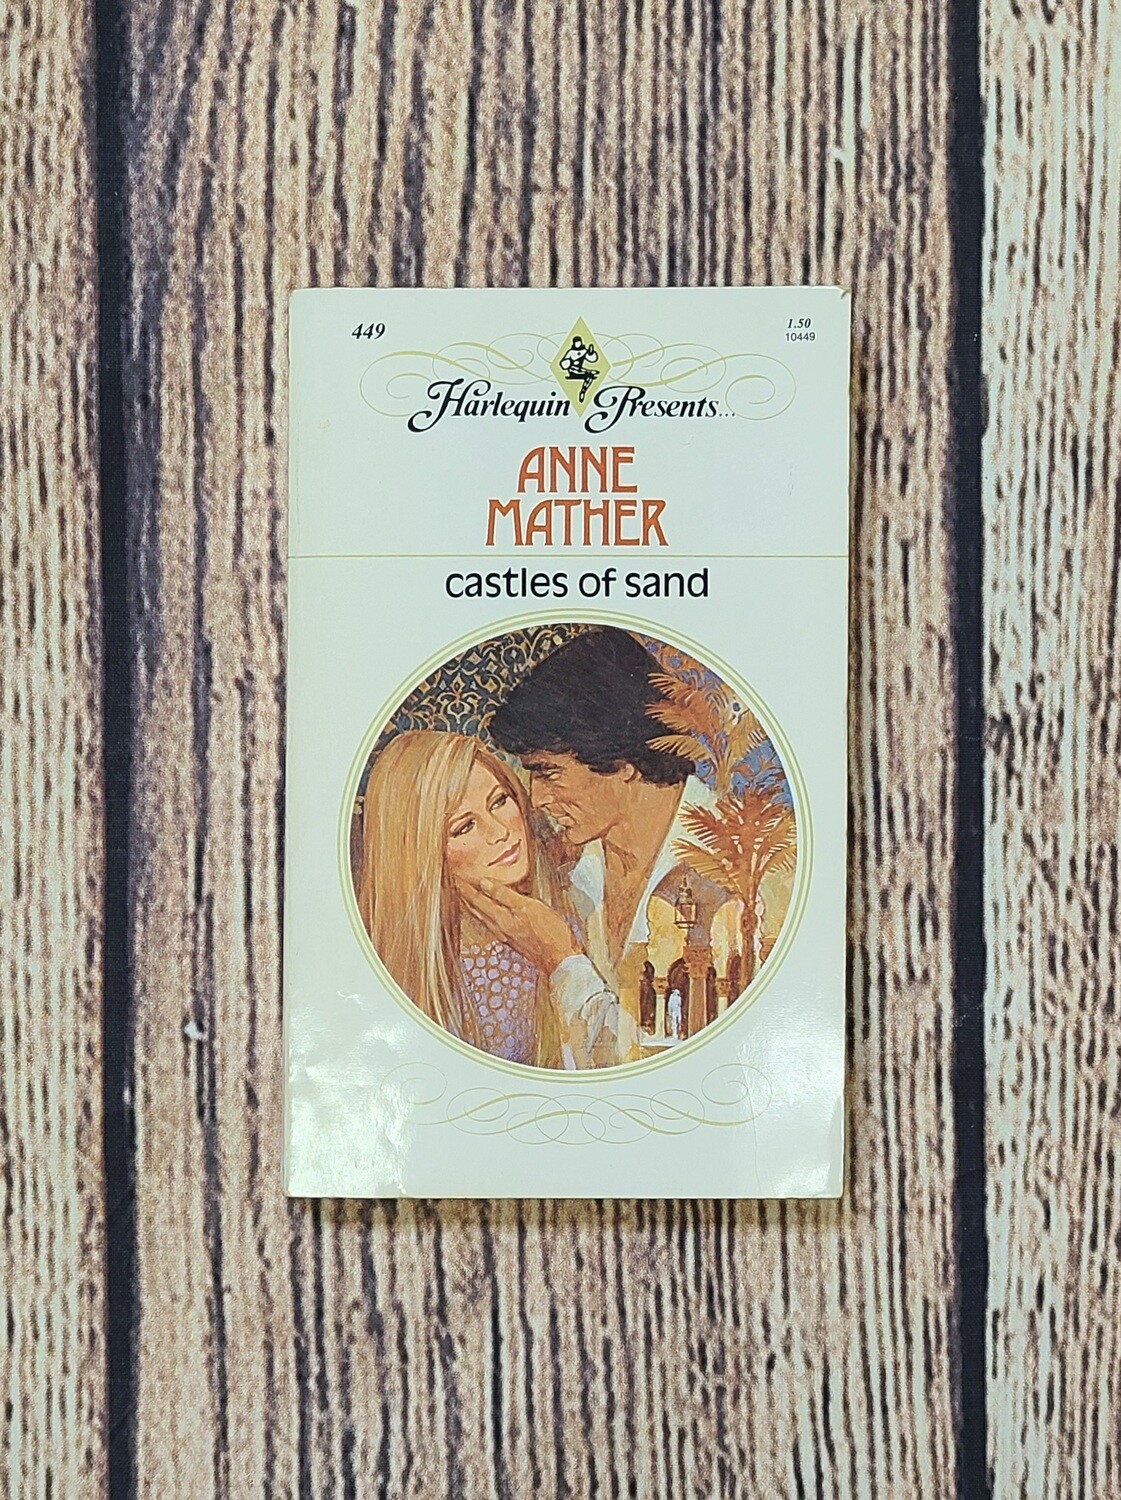 Castles of Sand by Anne Mather